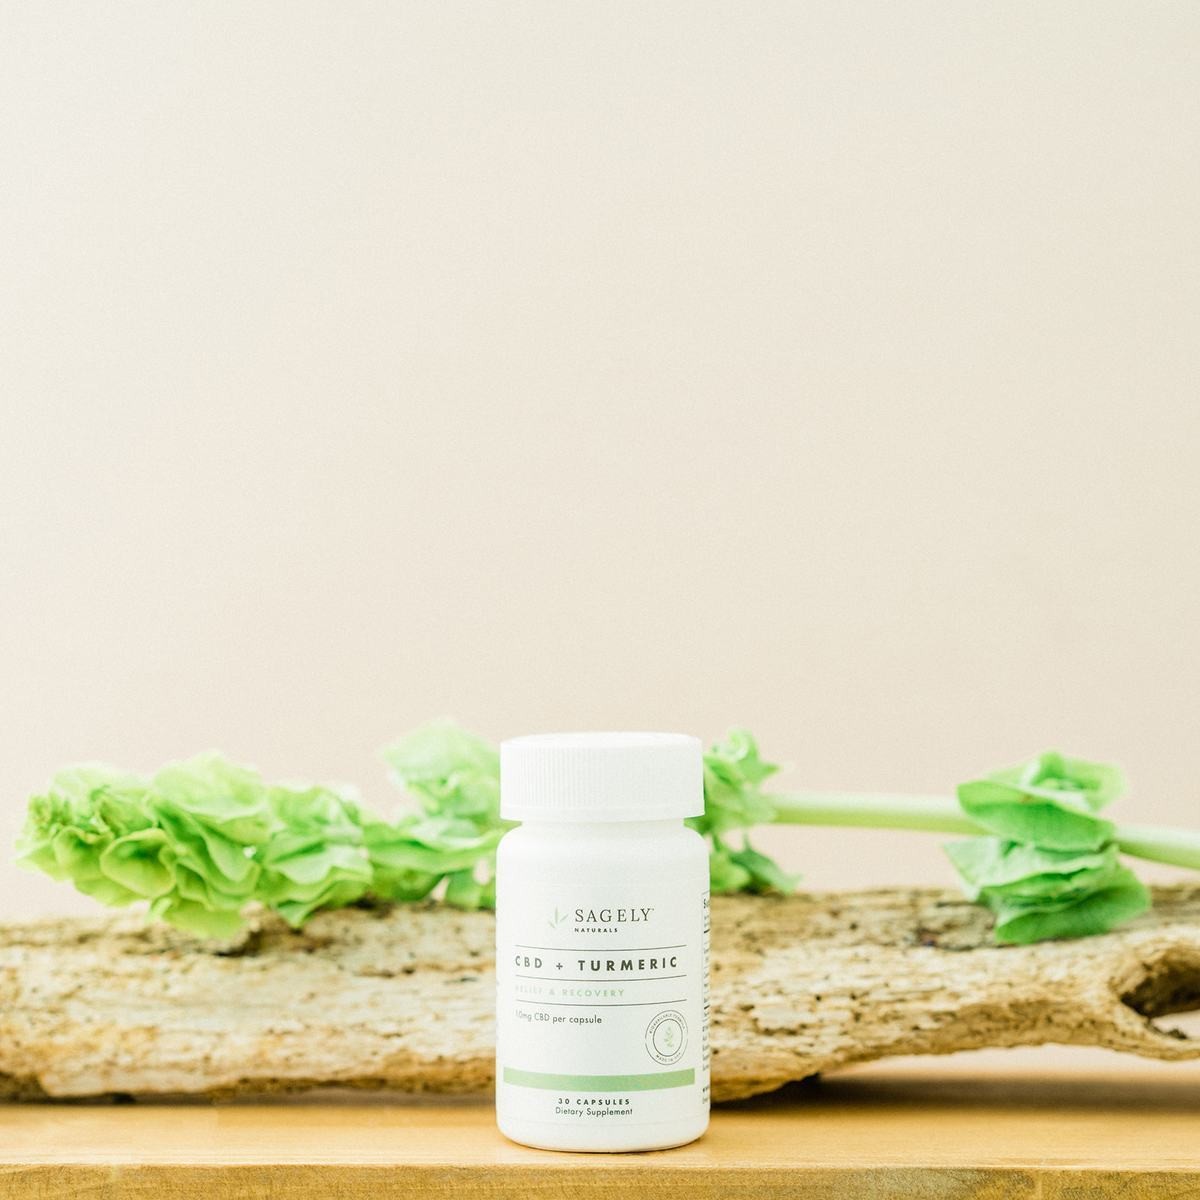 Sagely Naturals Relief and Recovery CBD with Turmeric Pills